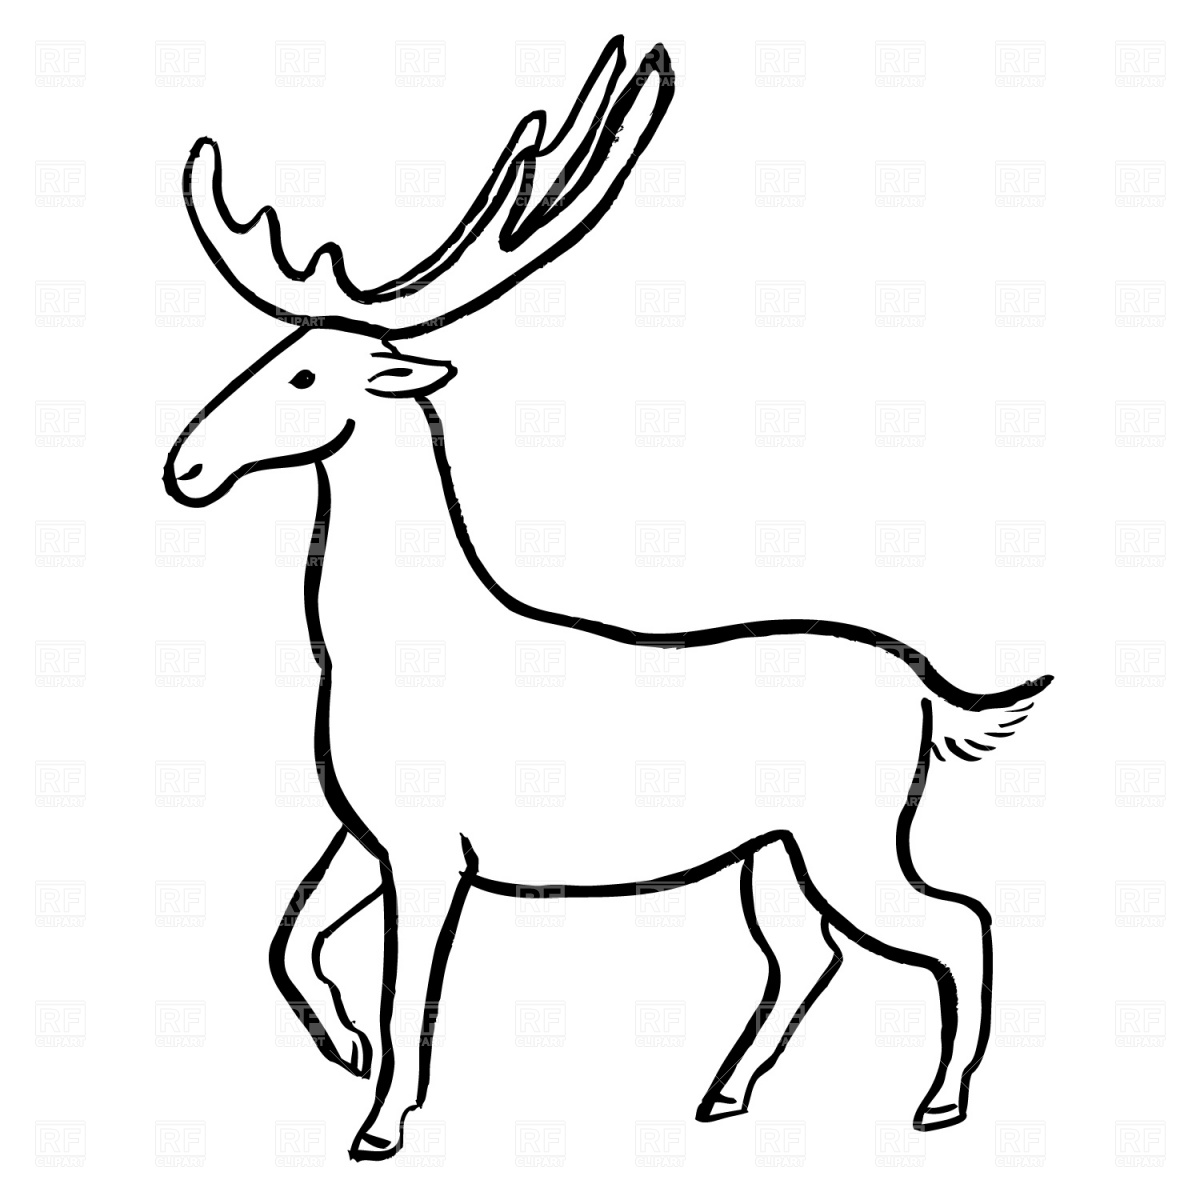 Image Of Moose 9 Moose Images For Clipart